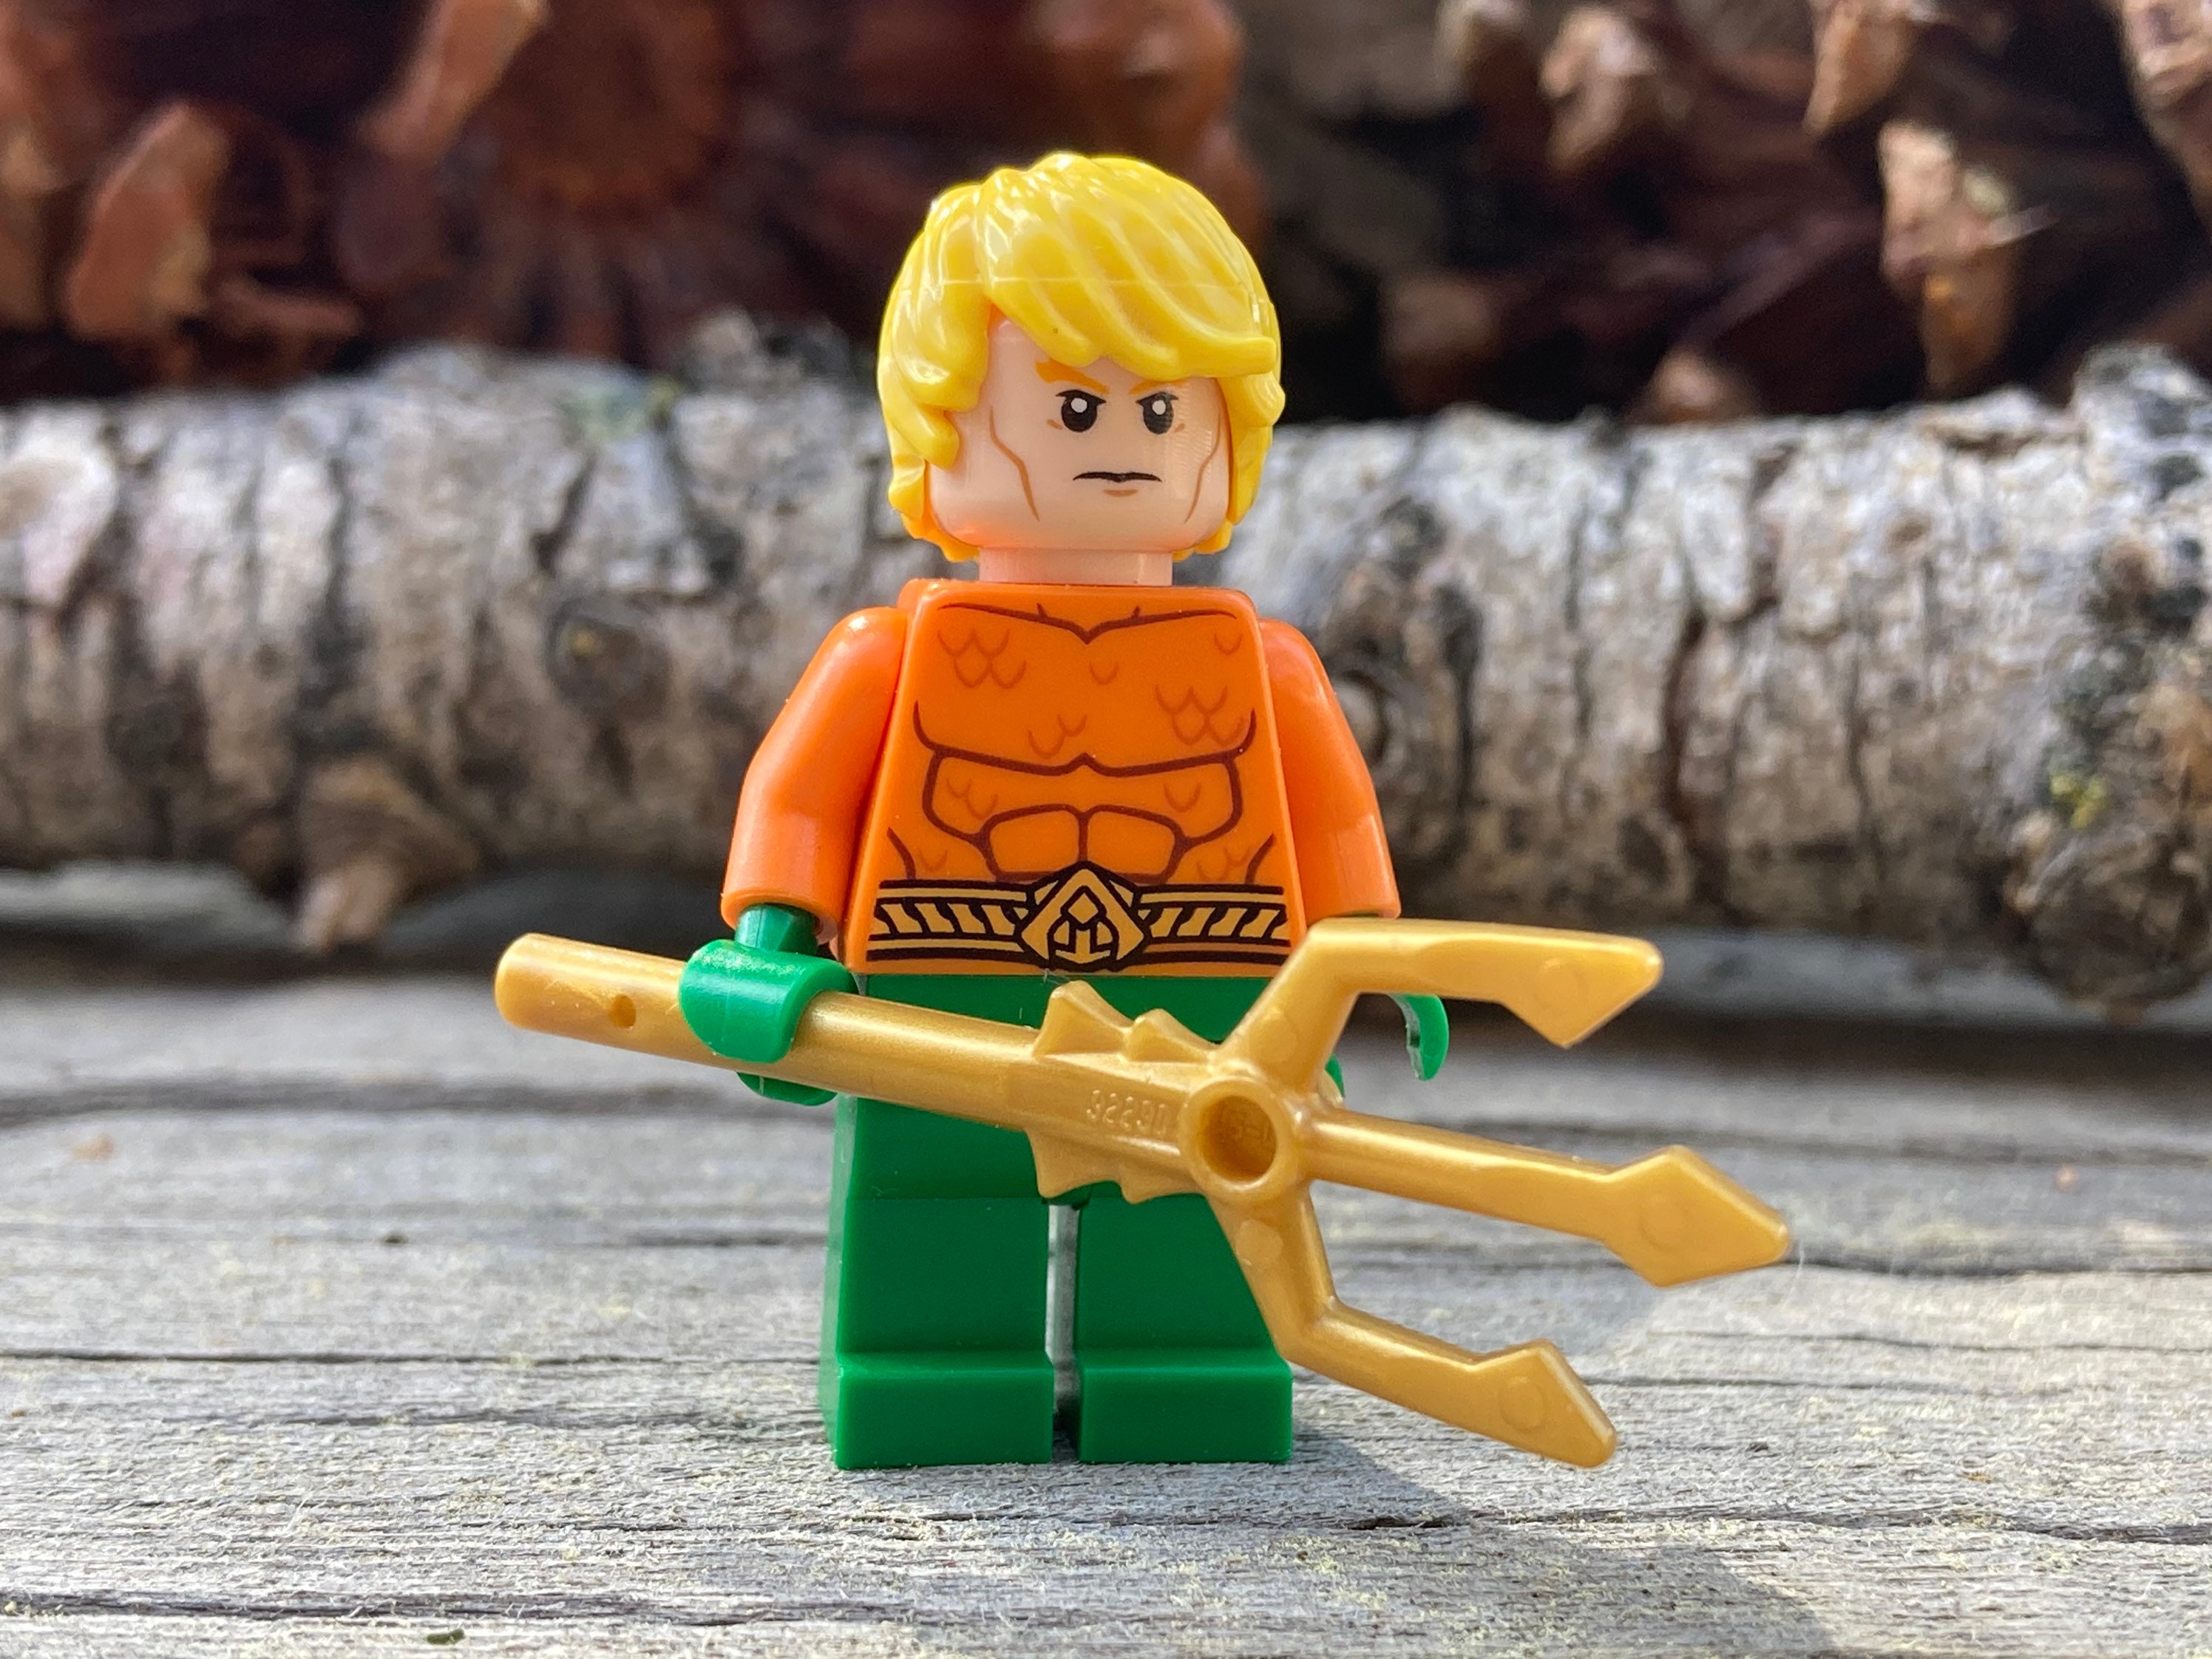 FOCO Aquaman Figures, Collectibles, and Fan Gear.